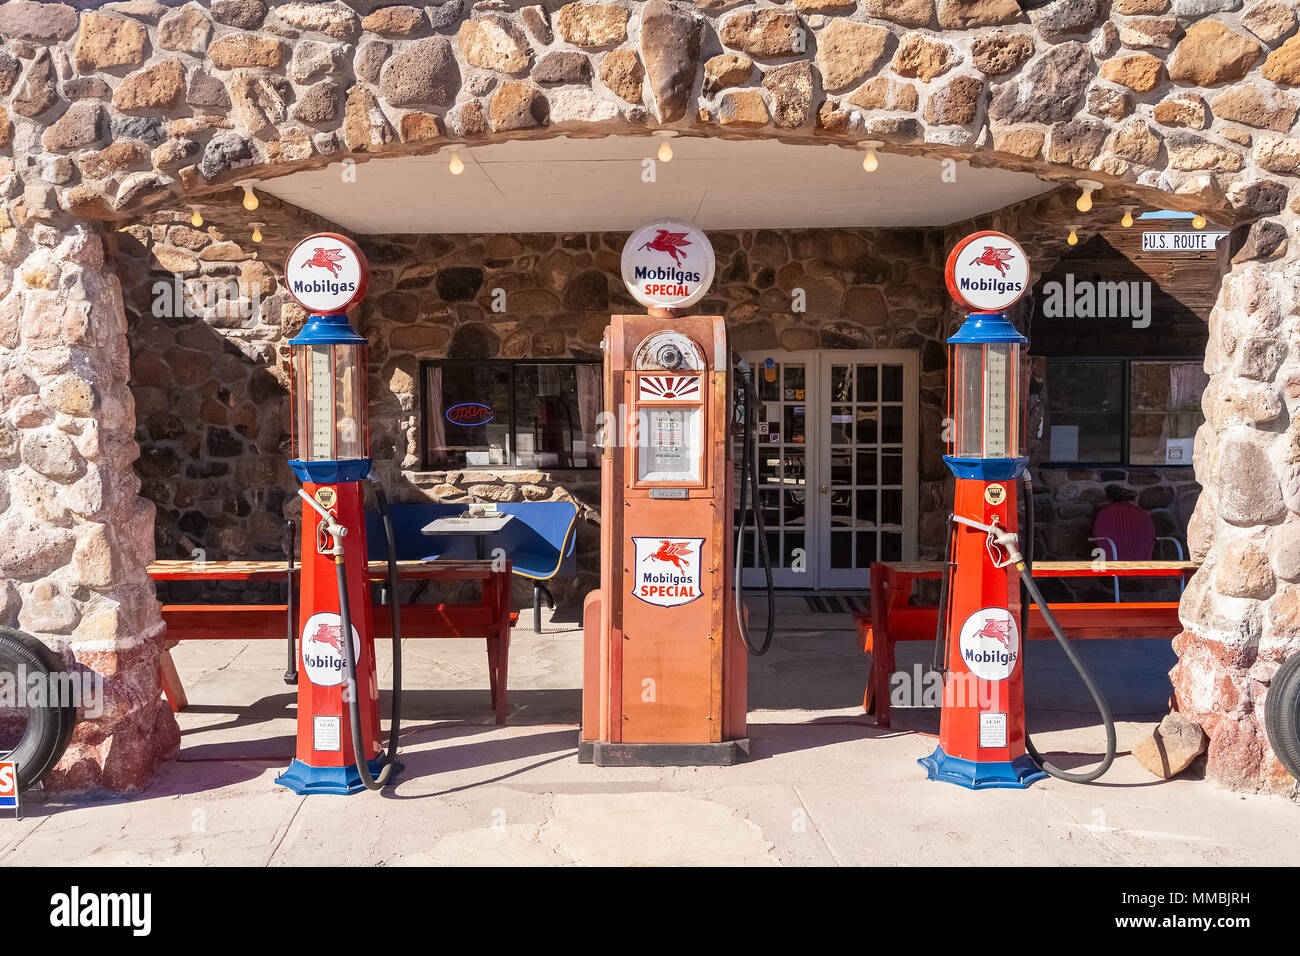 Old Mobilgas pumps displayed in front of a refurbished service station used as a snack and gift shop along the r Stock Photo